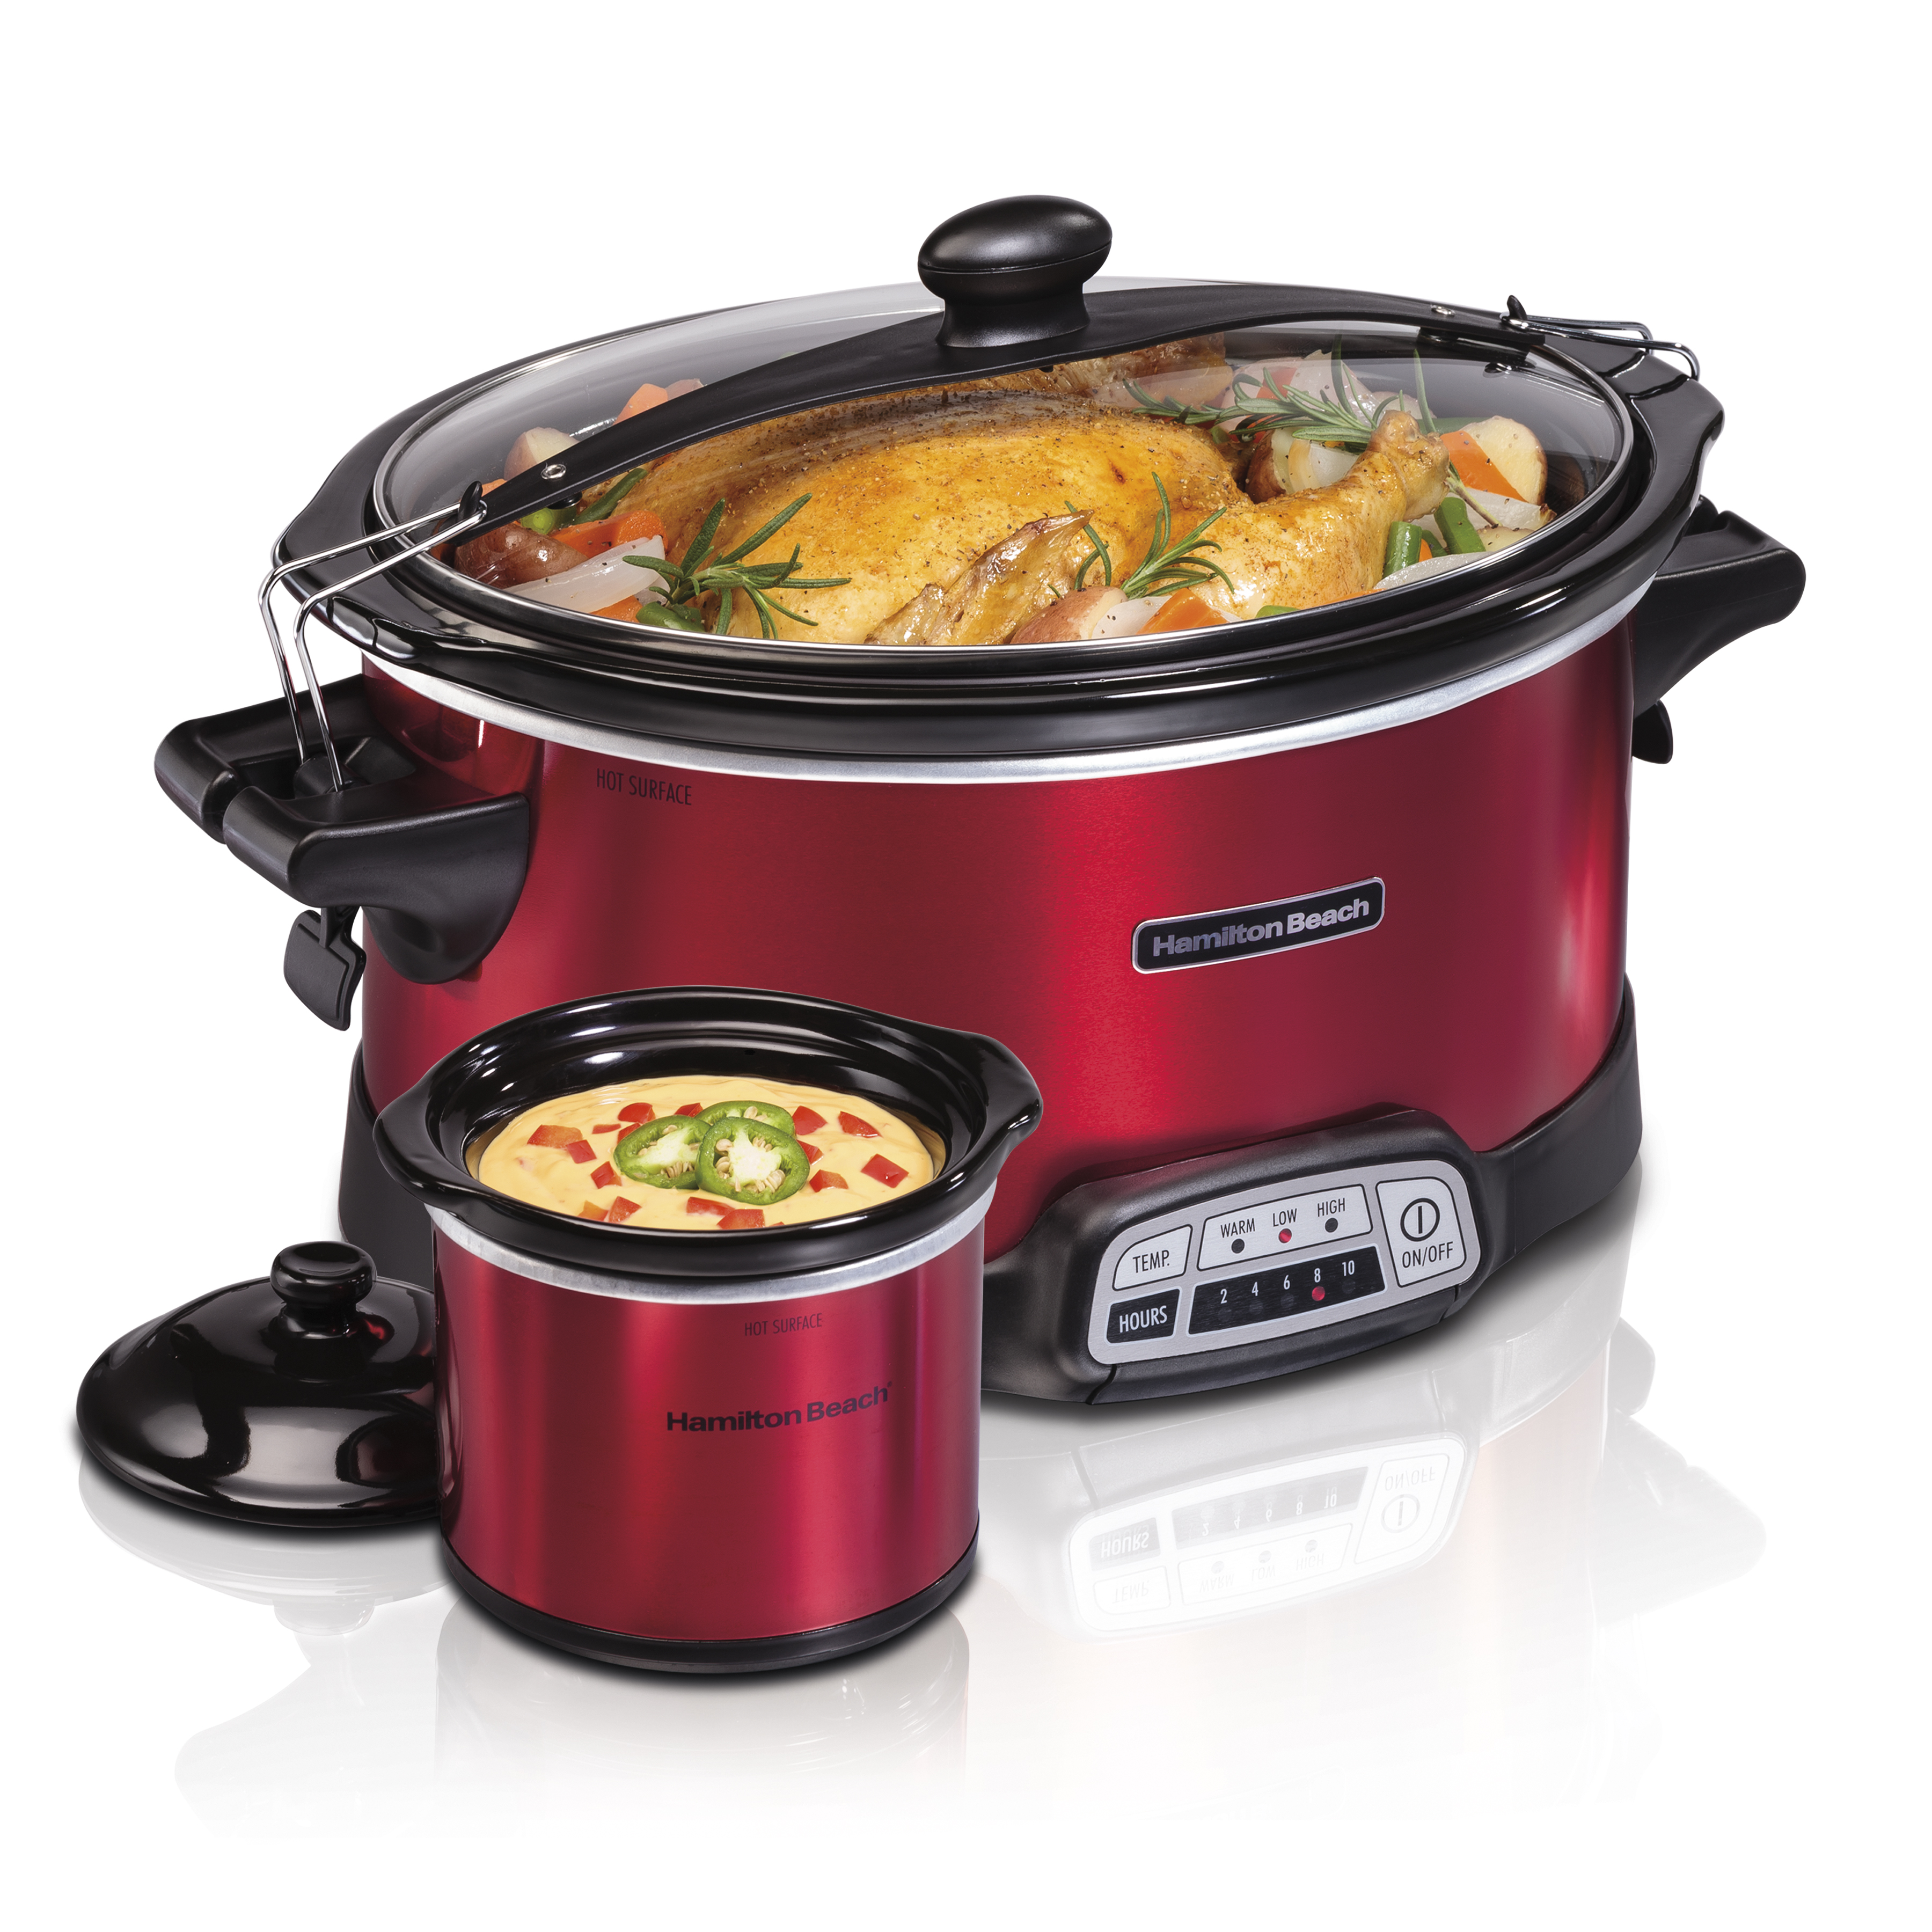 Hamilton Beach Stay or Go Programmable Slow Cooker with Party Dipper, 7 Quart Capacity,Removable Crock, Red, 33478 - image 1 of 8